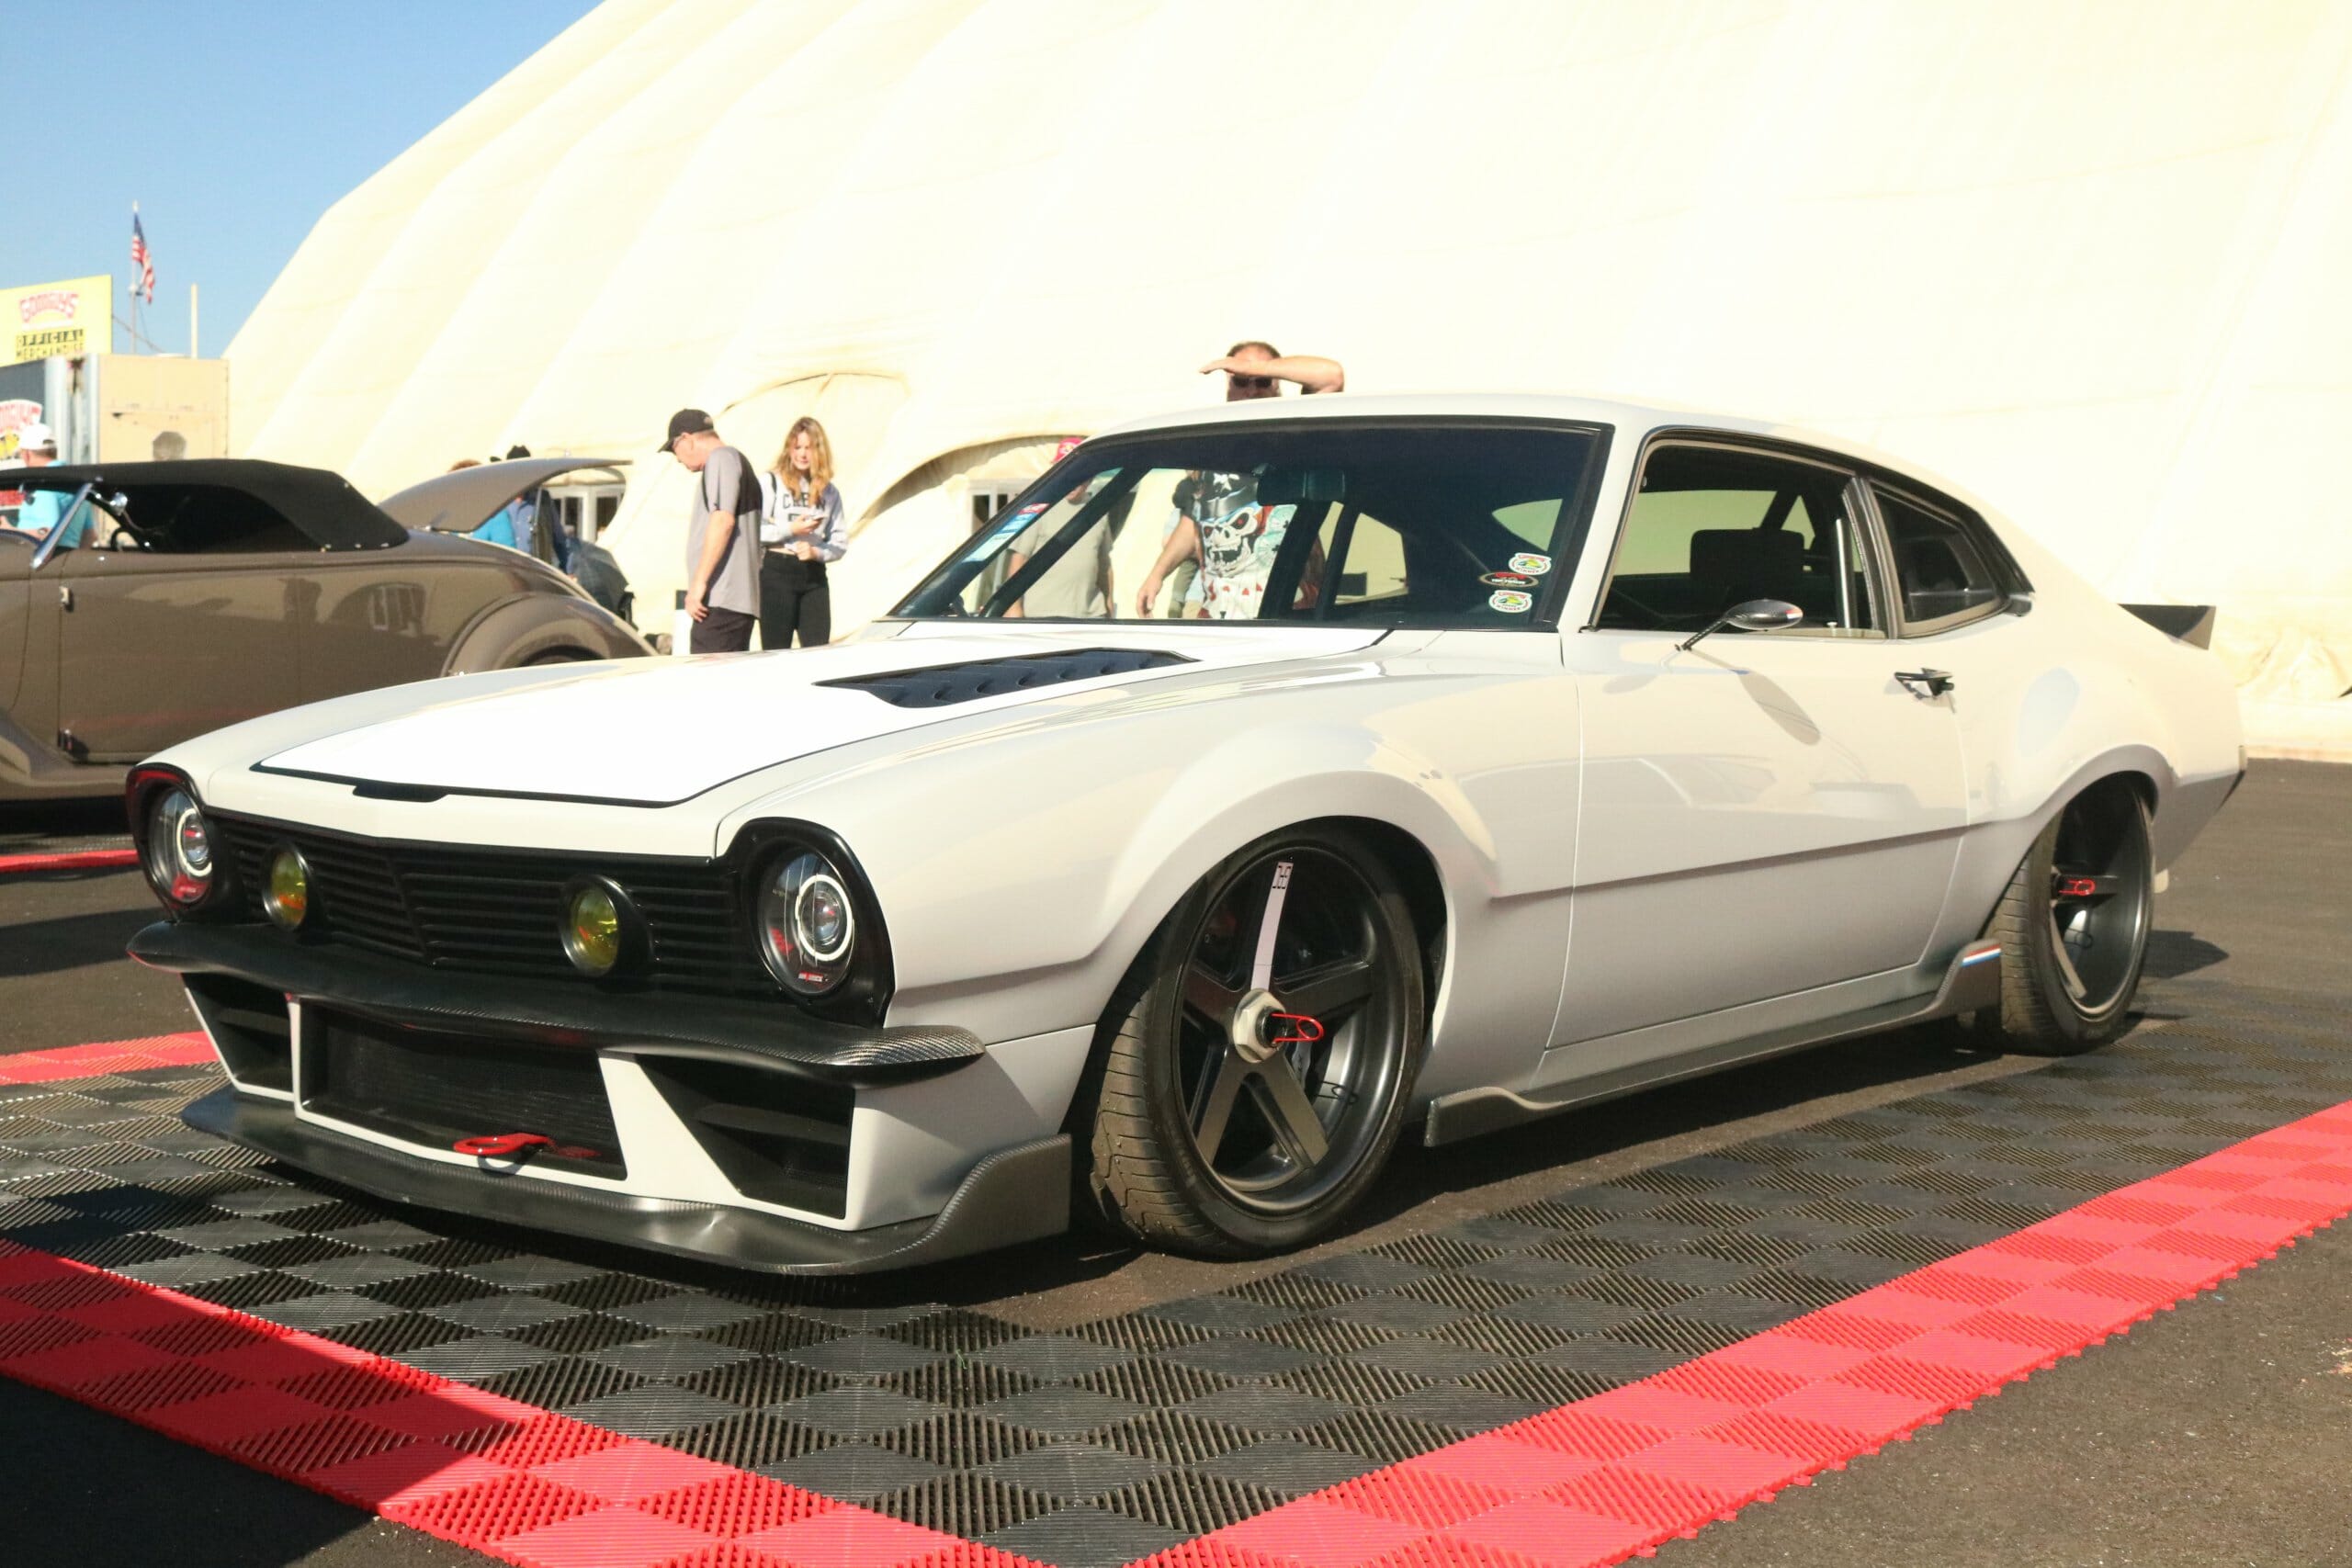 Goodguys, Goodguys&#8217; Top 12 featured at Southwest Nationals, ClassicCars.com Journal